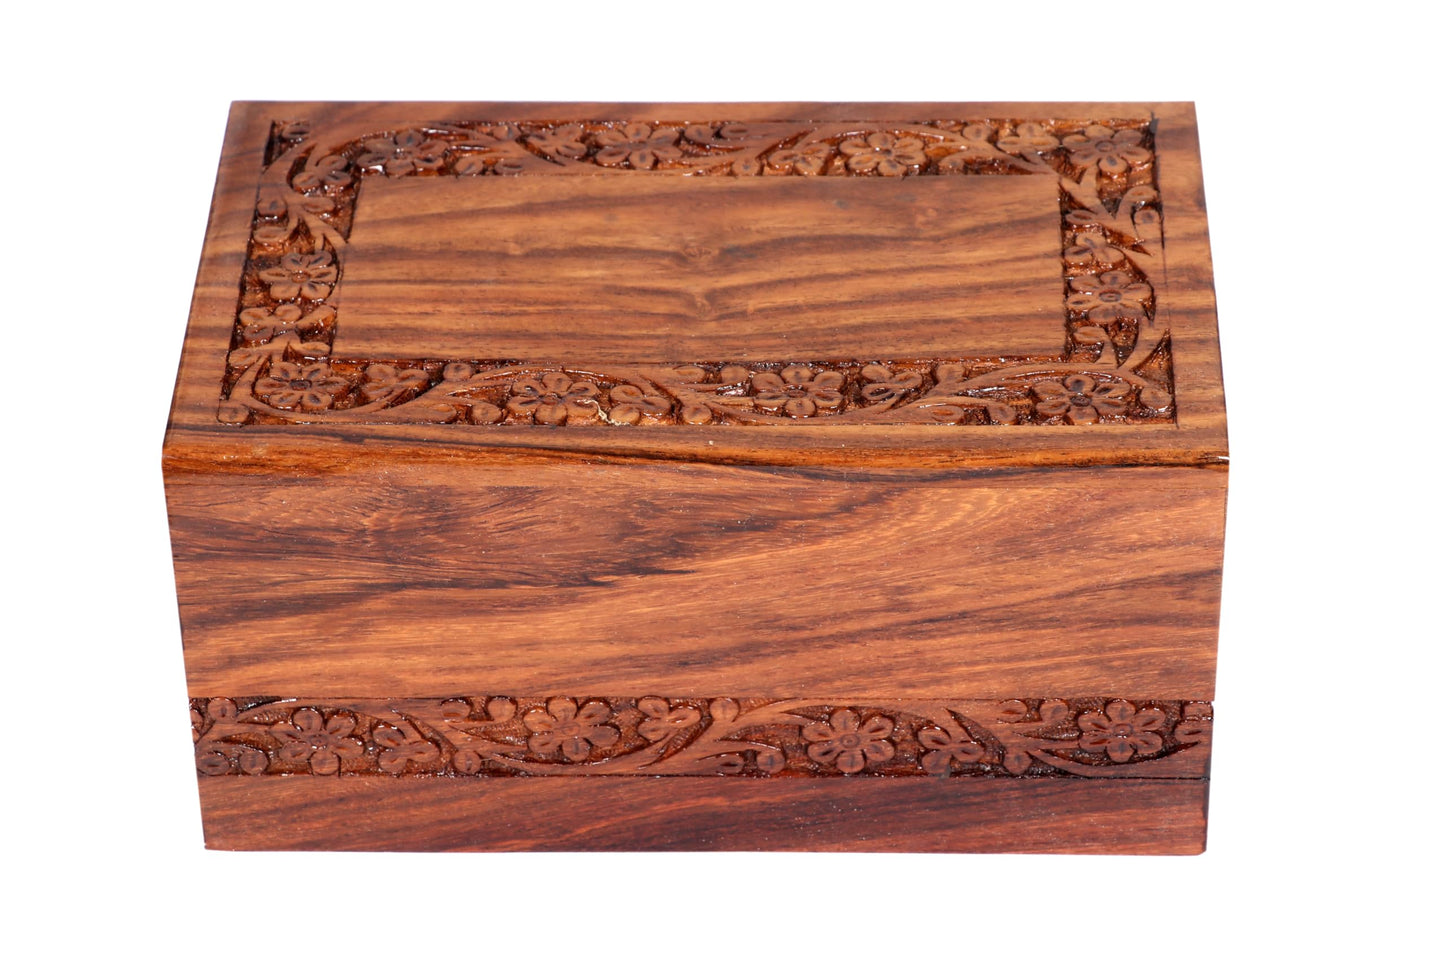 Handmade Rosewood Urn Box for Human Ashes Engraved Border Wooden Cremation Box/Urns for Human Ashes Adult, Funeral Urn Box Wooden Decorative Urns Box